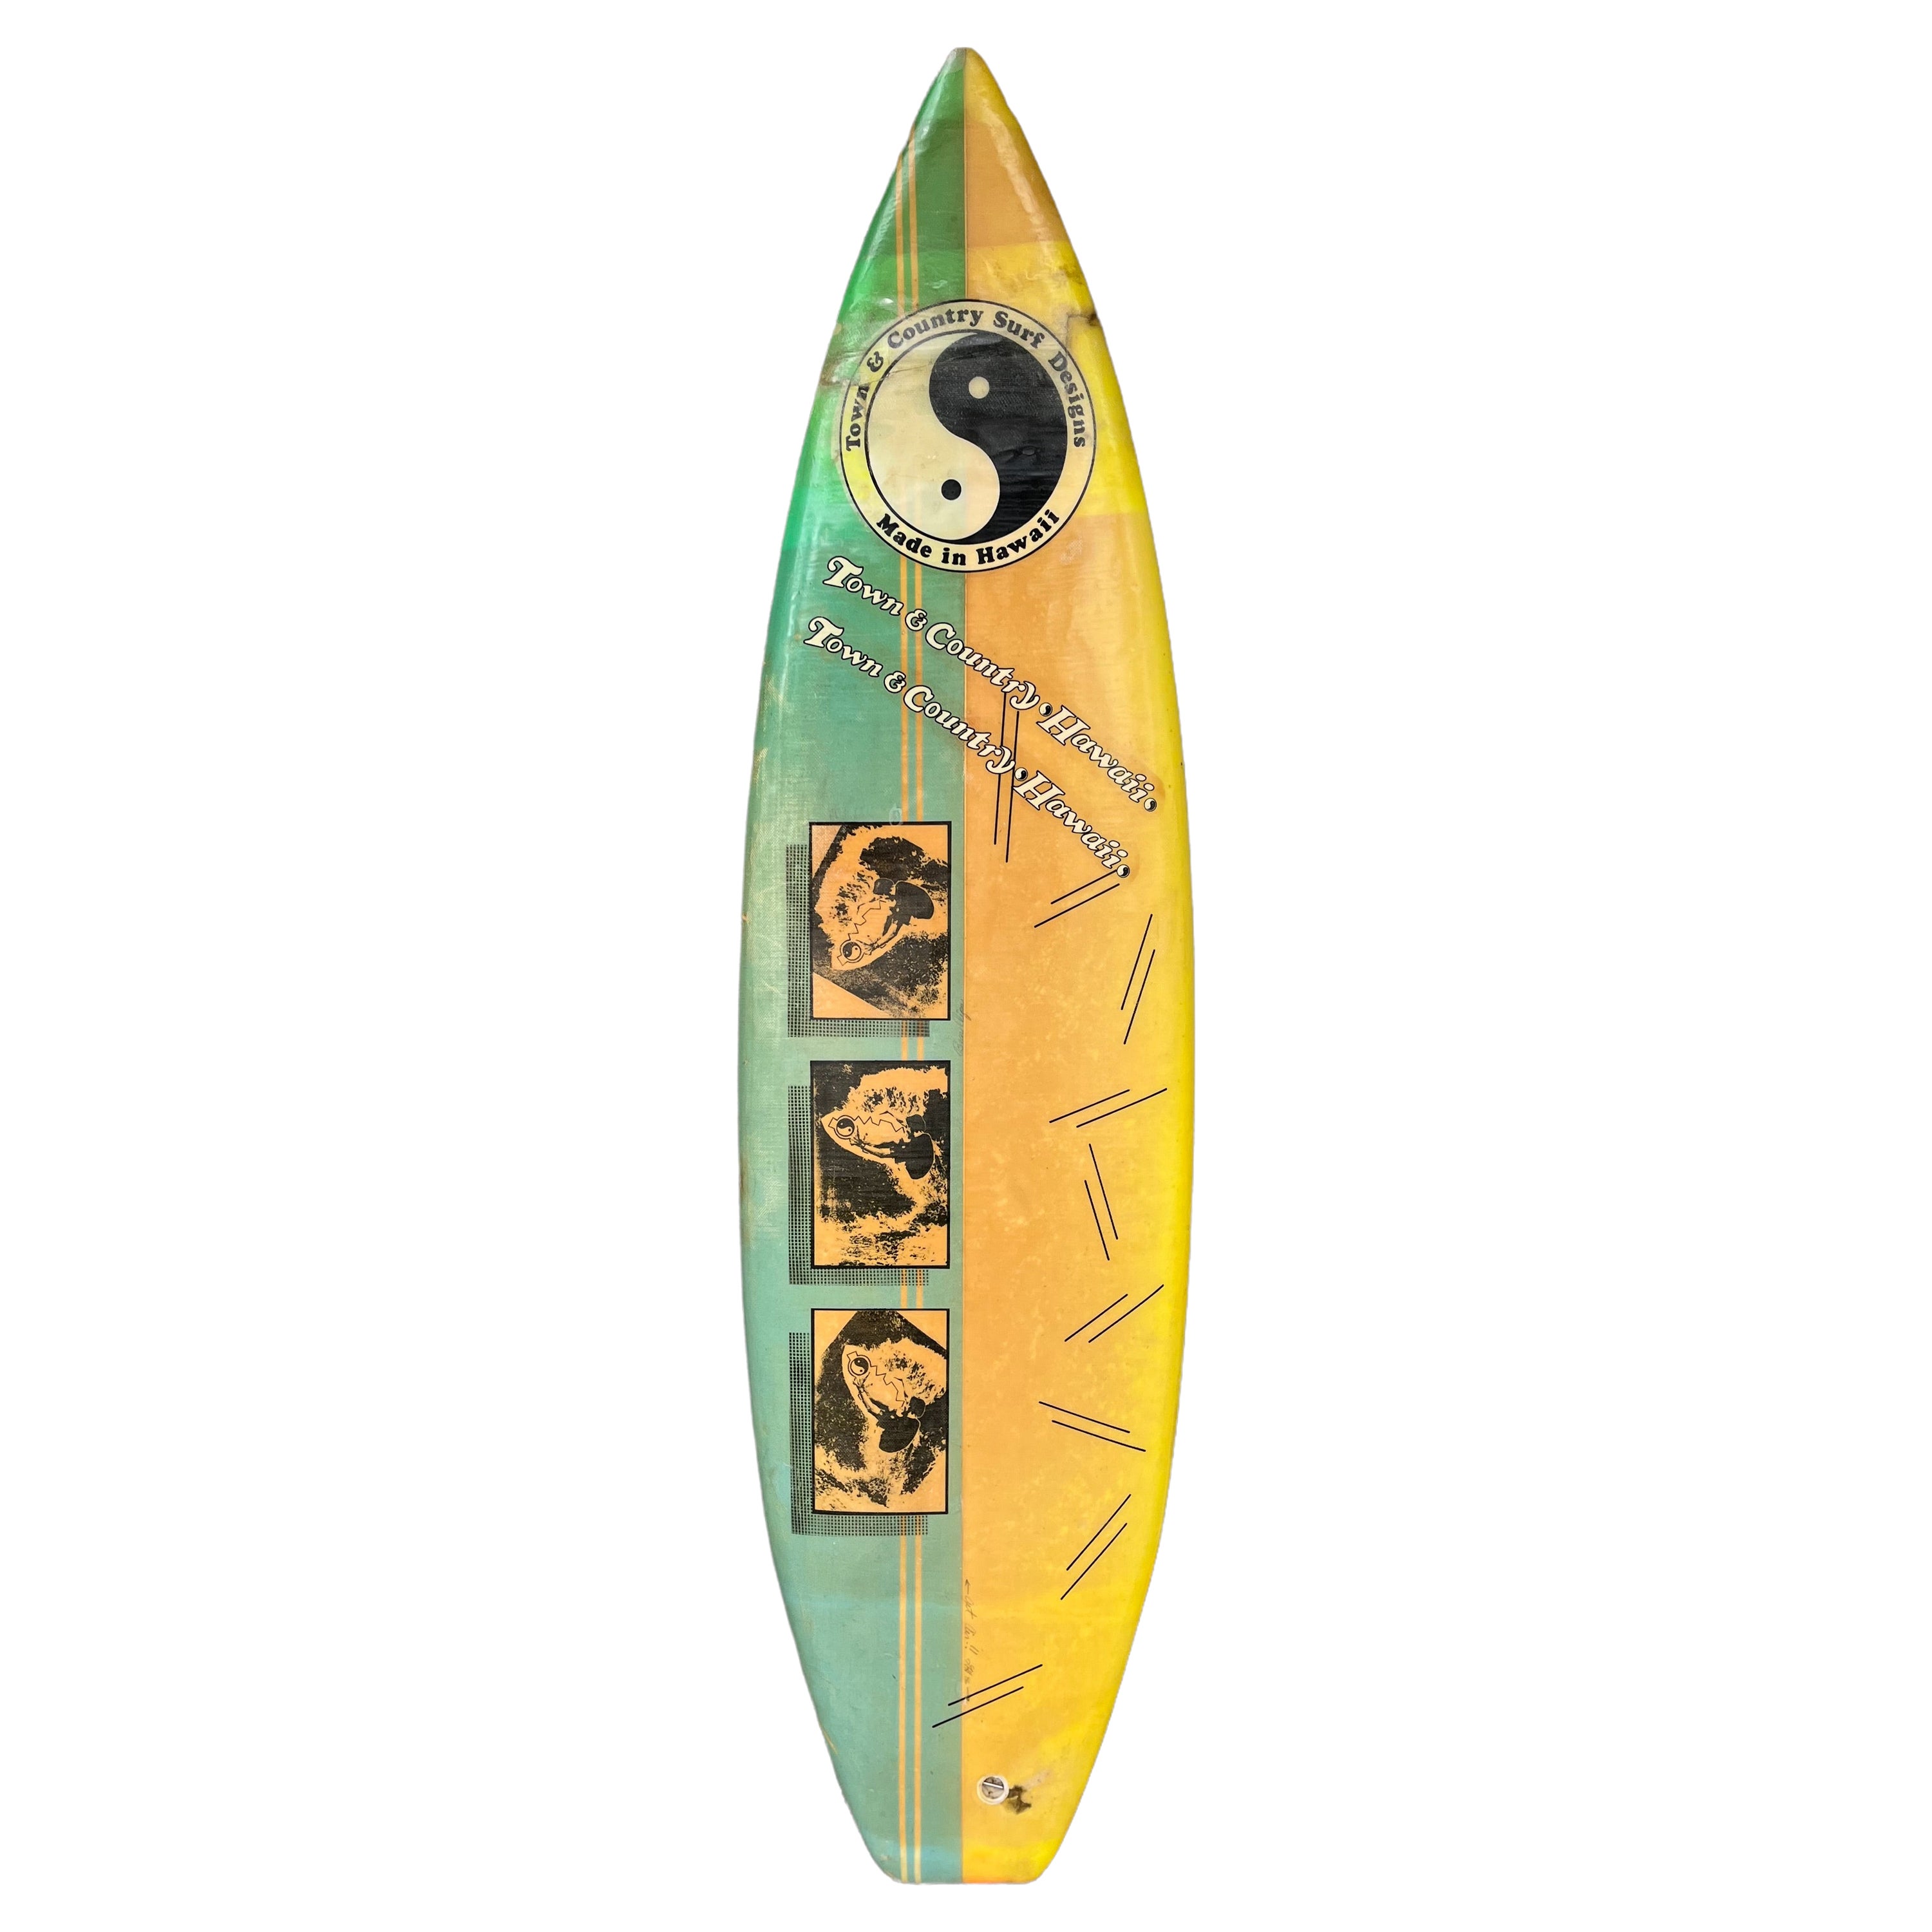 1986 Town & Country Surfboard Shaped by the Late Ben Aipa